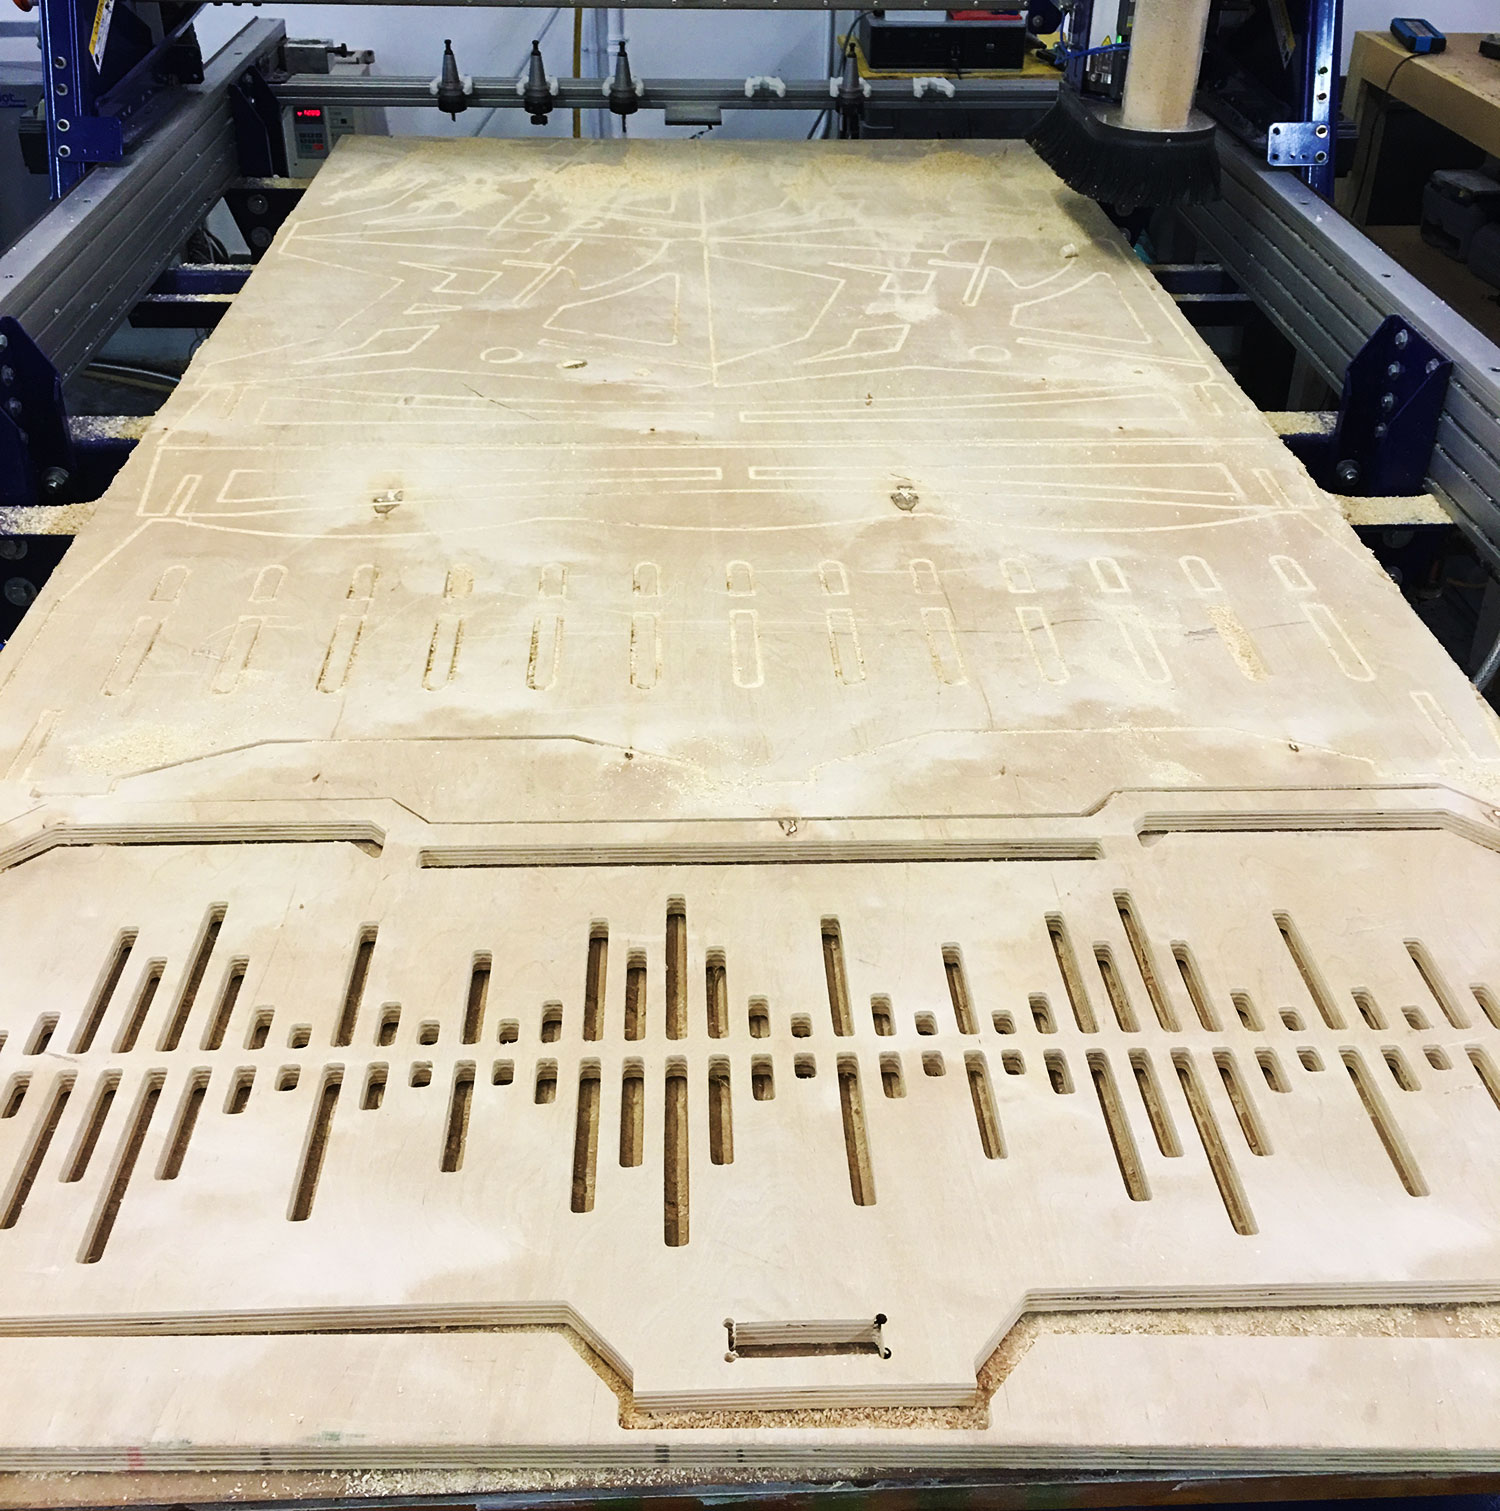 playatech furniture being cut out in 3 axis cnc machine